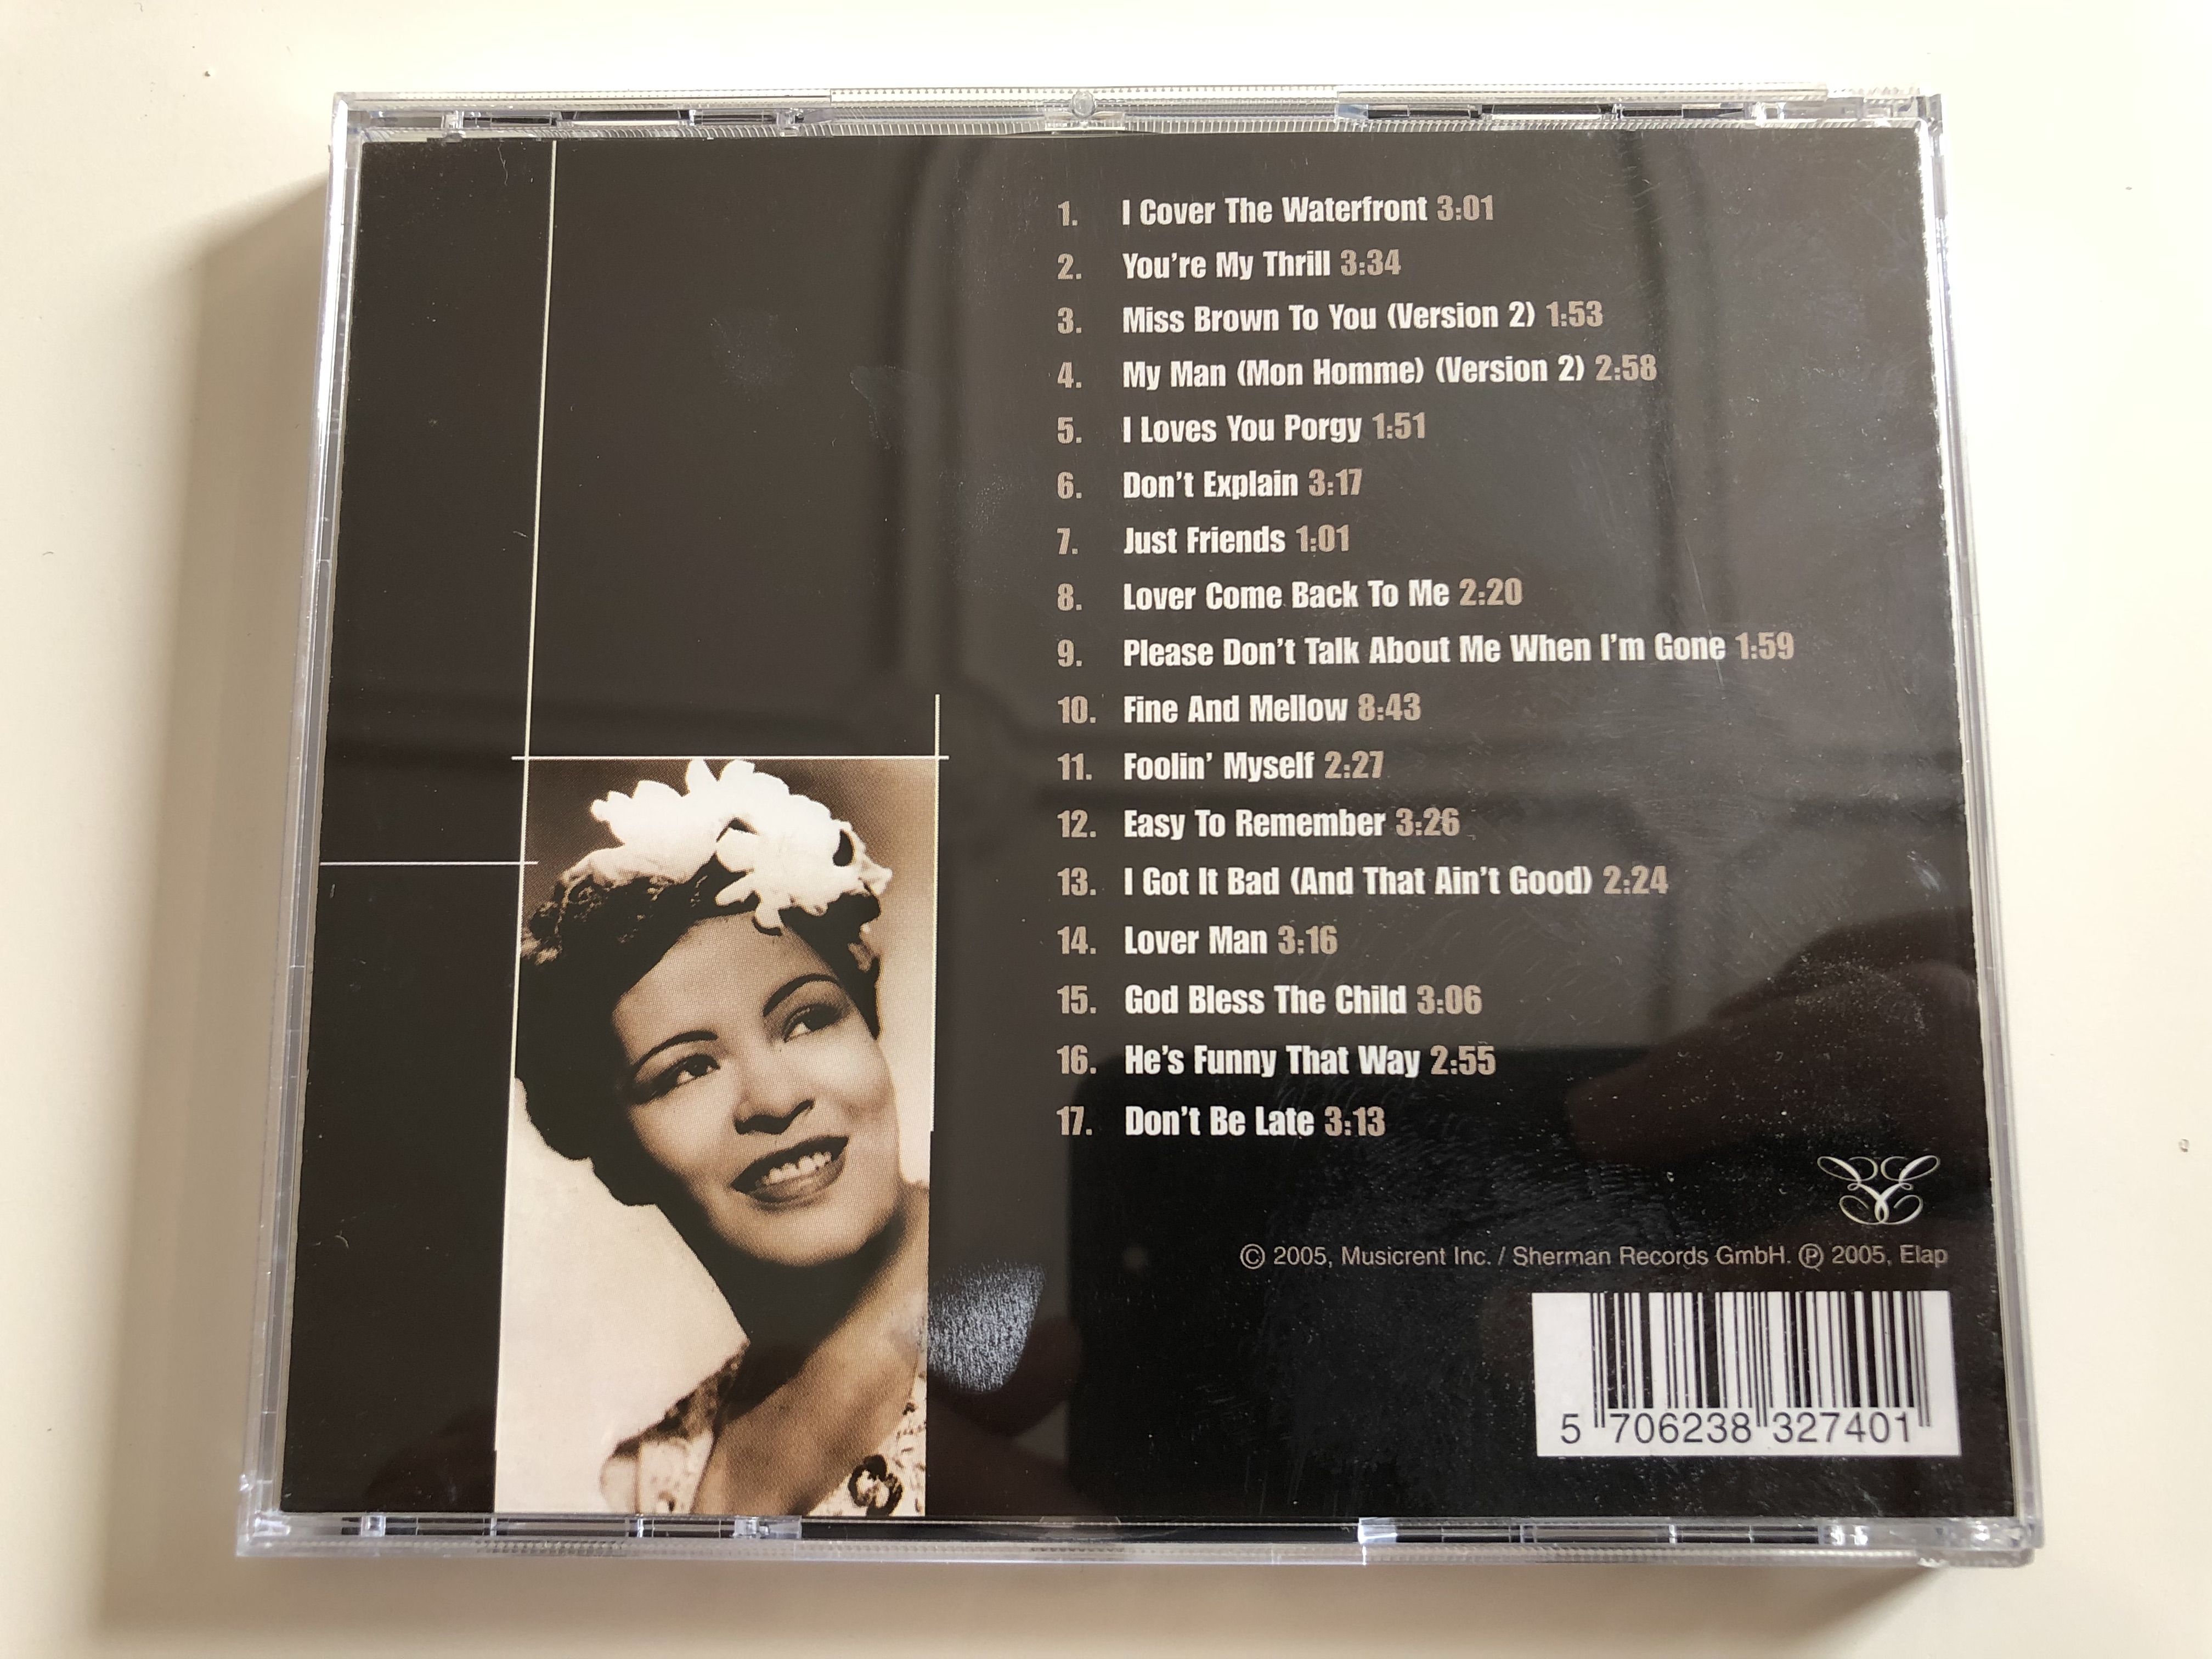 Billie Holiday - You're my thrill / Lady Sings The Blues / Audio CD 2005 /  American jazz vocalist - bibleinmylanguage